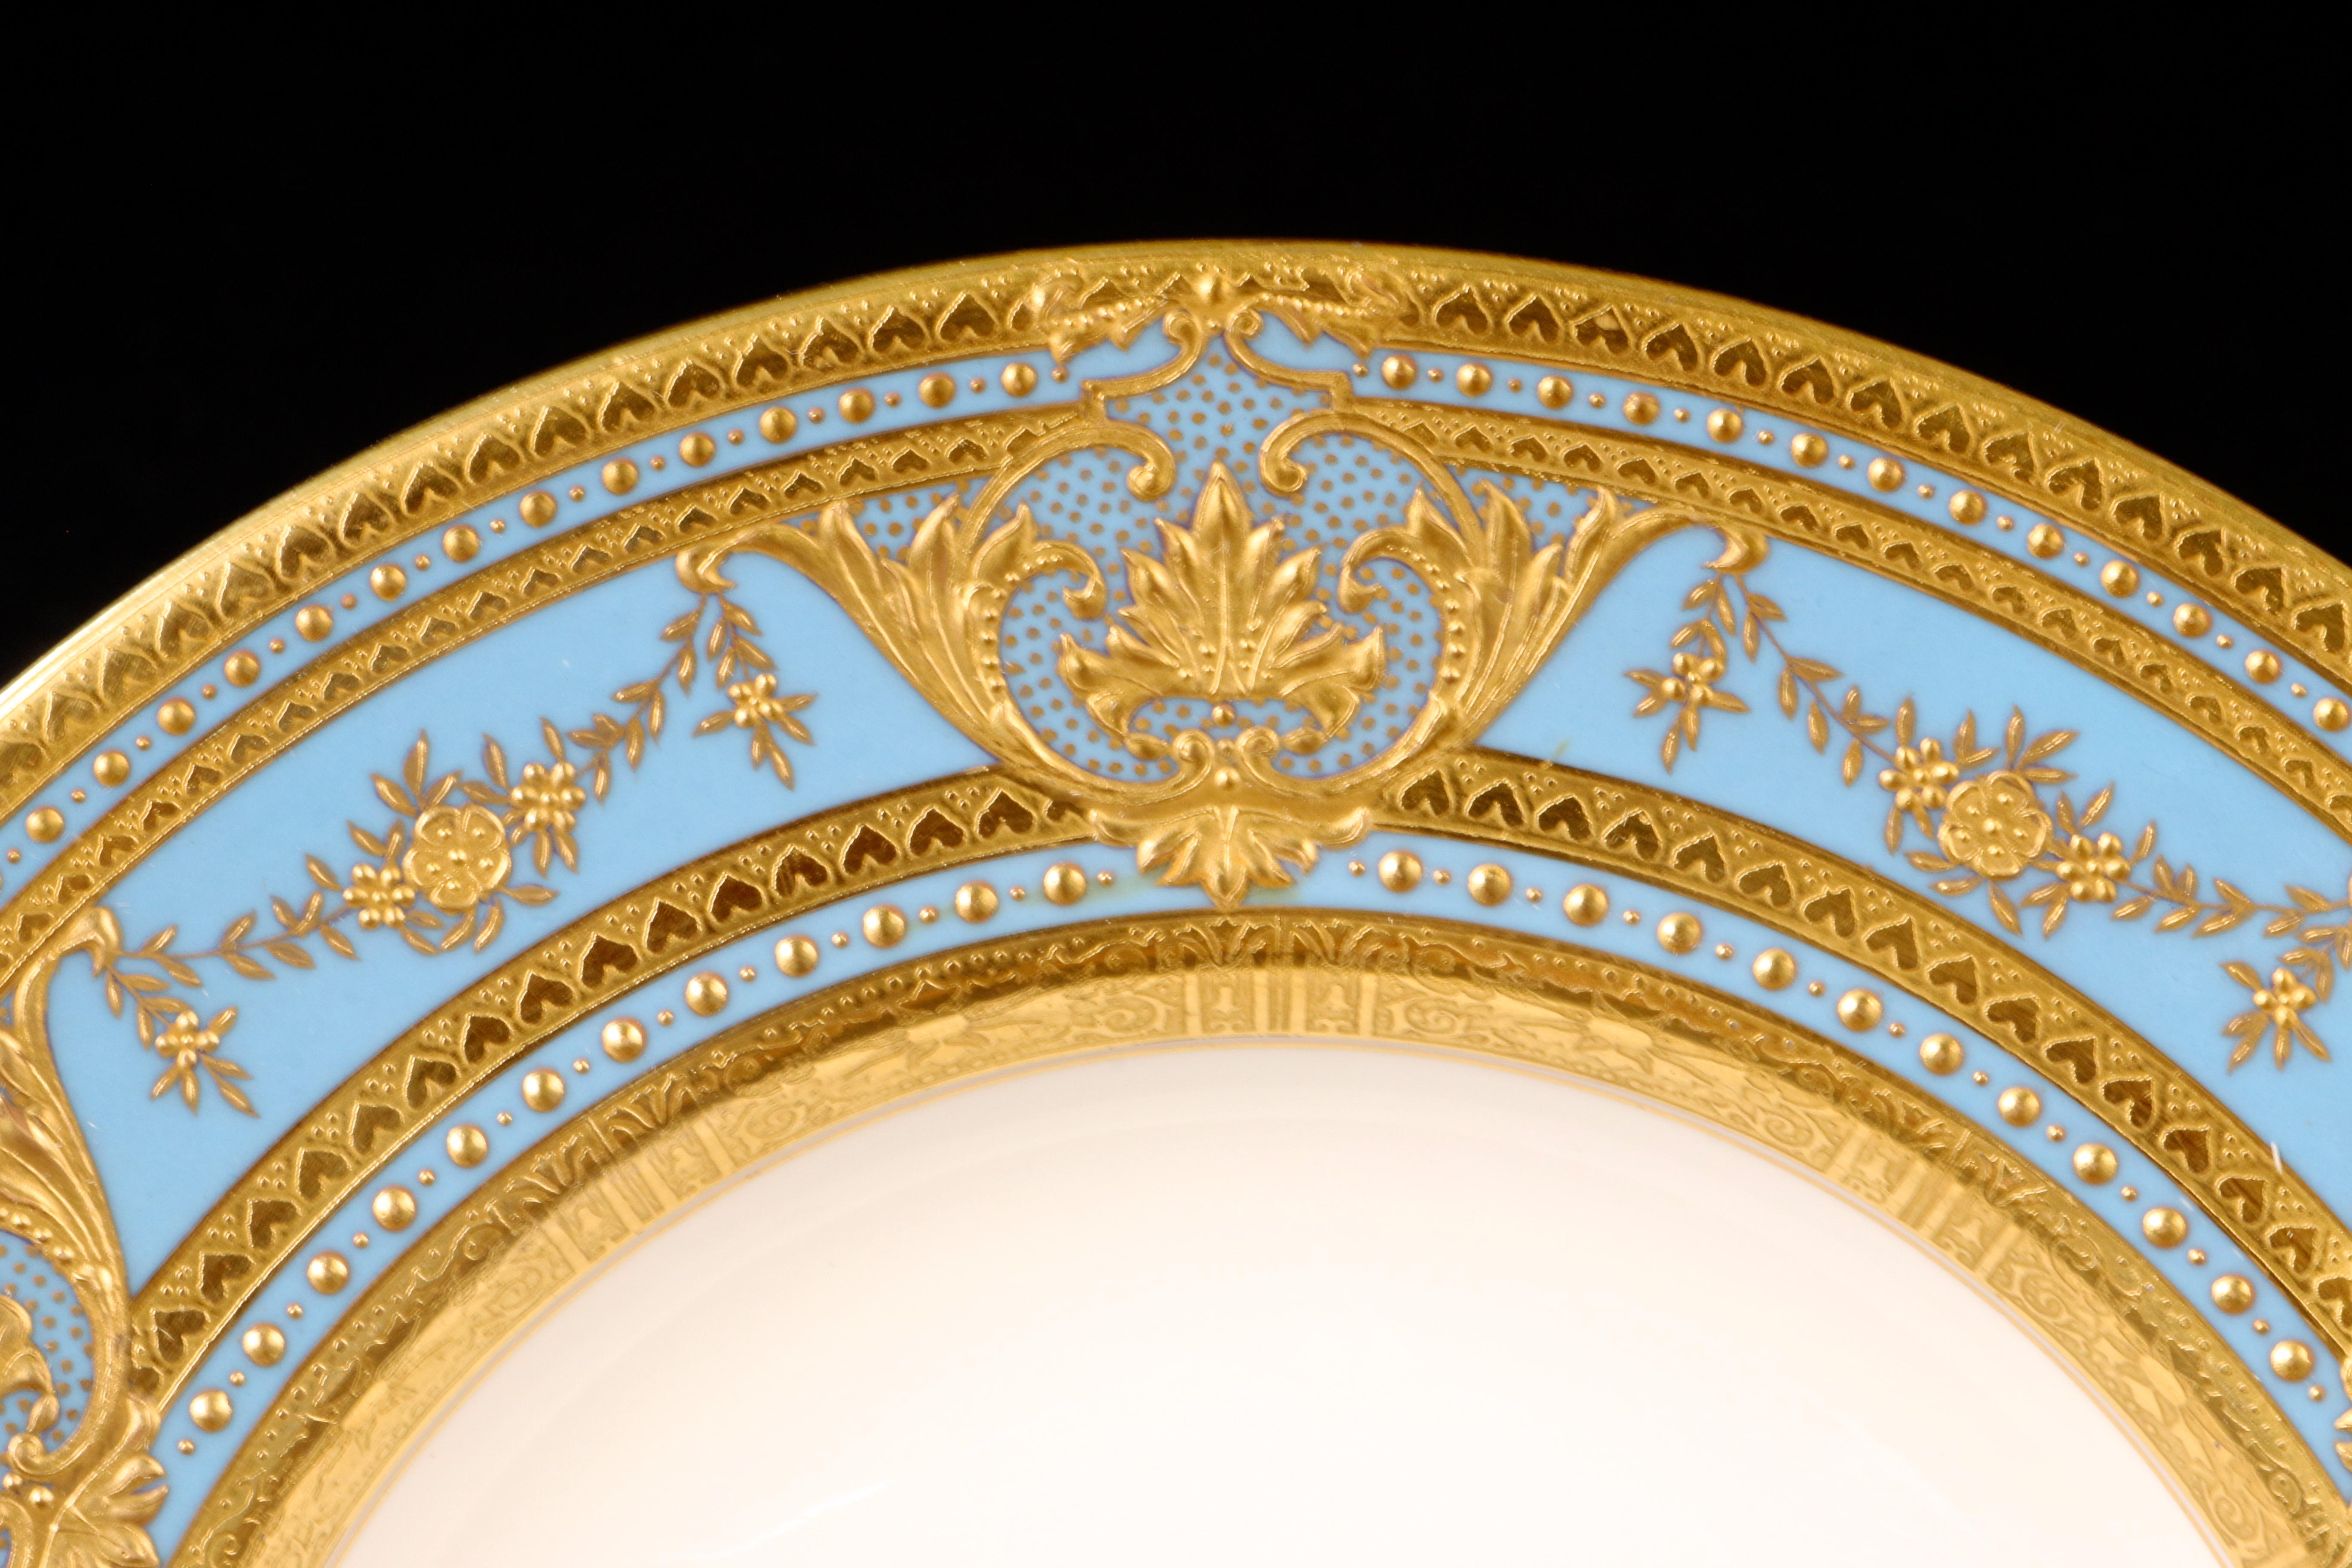 Here are 7 Minton, Stoke-on-Trent, Staffordshire, England 22-karat raised-paste gold and blue heavily gilded soup plates. The soup plates feature 6 gilded cartouches composed of a central leaf and foliate, interspersed between the cartouches is a